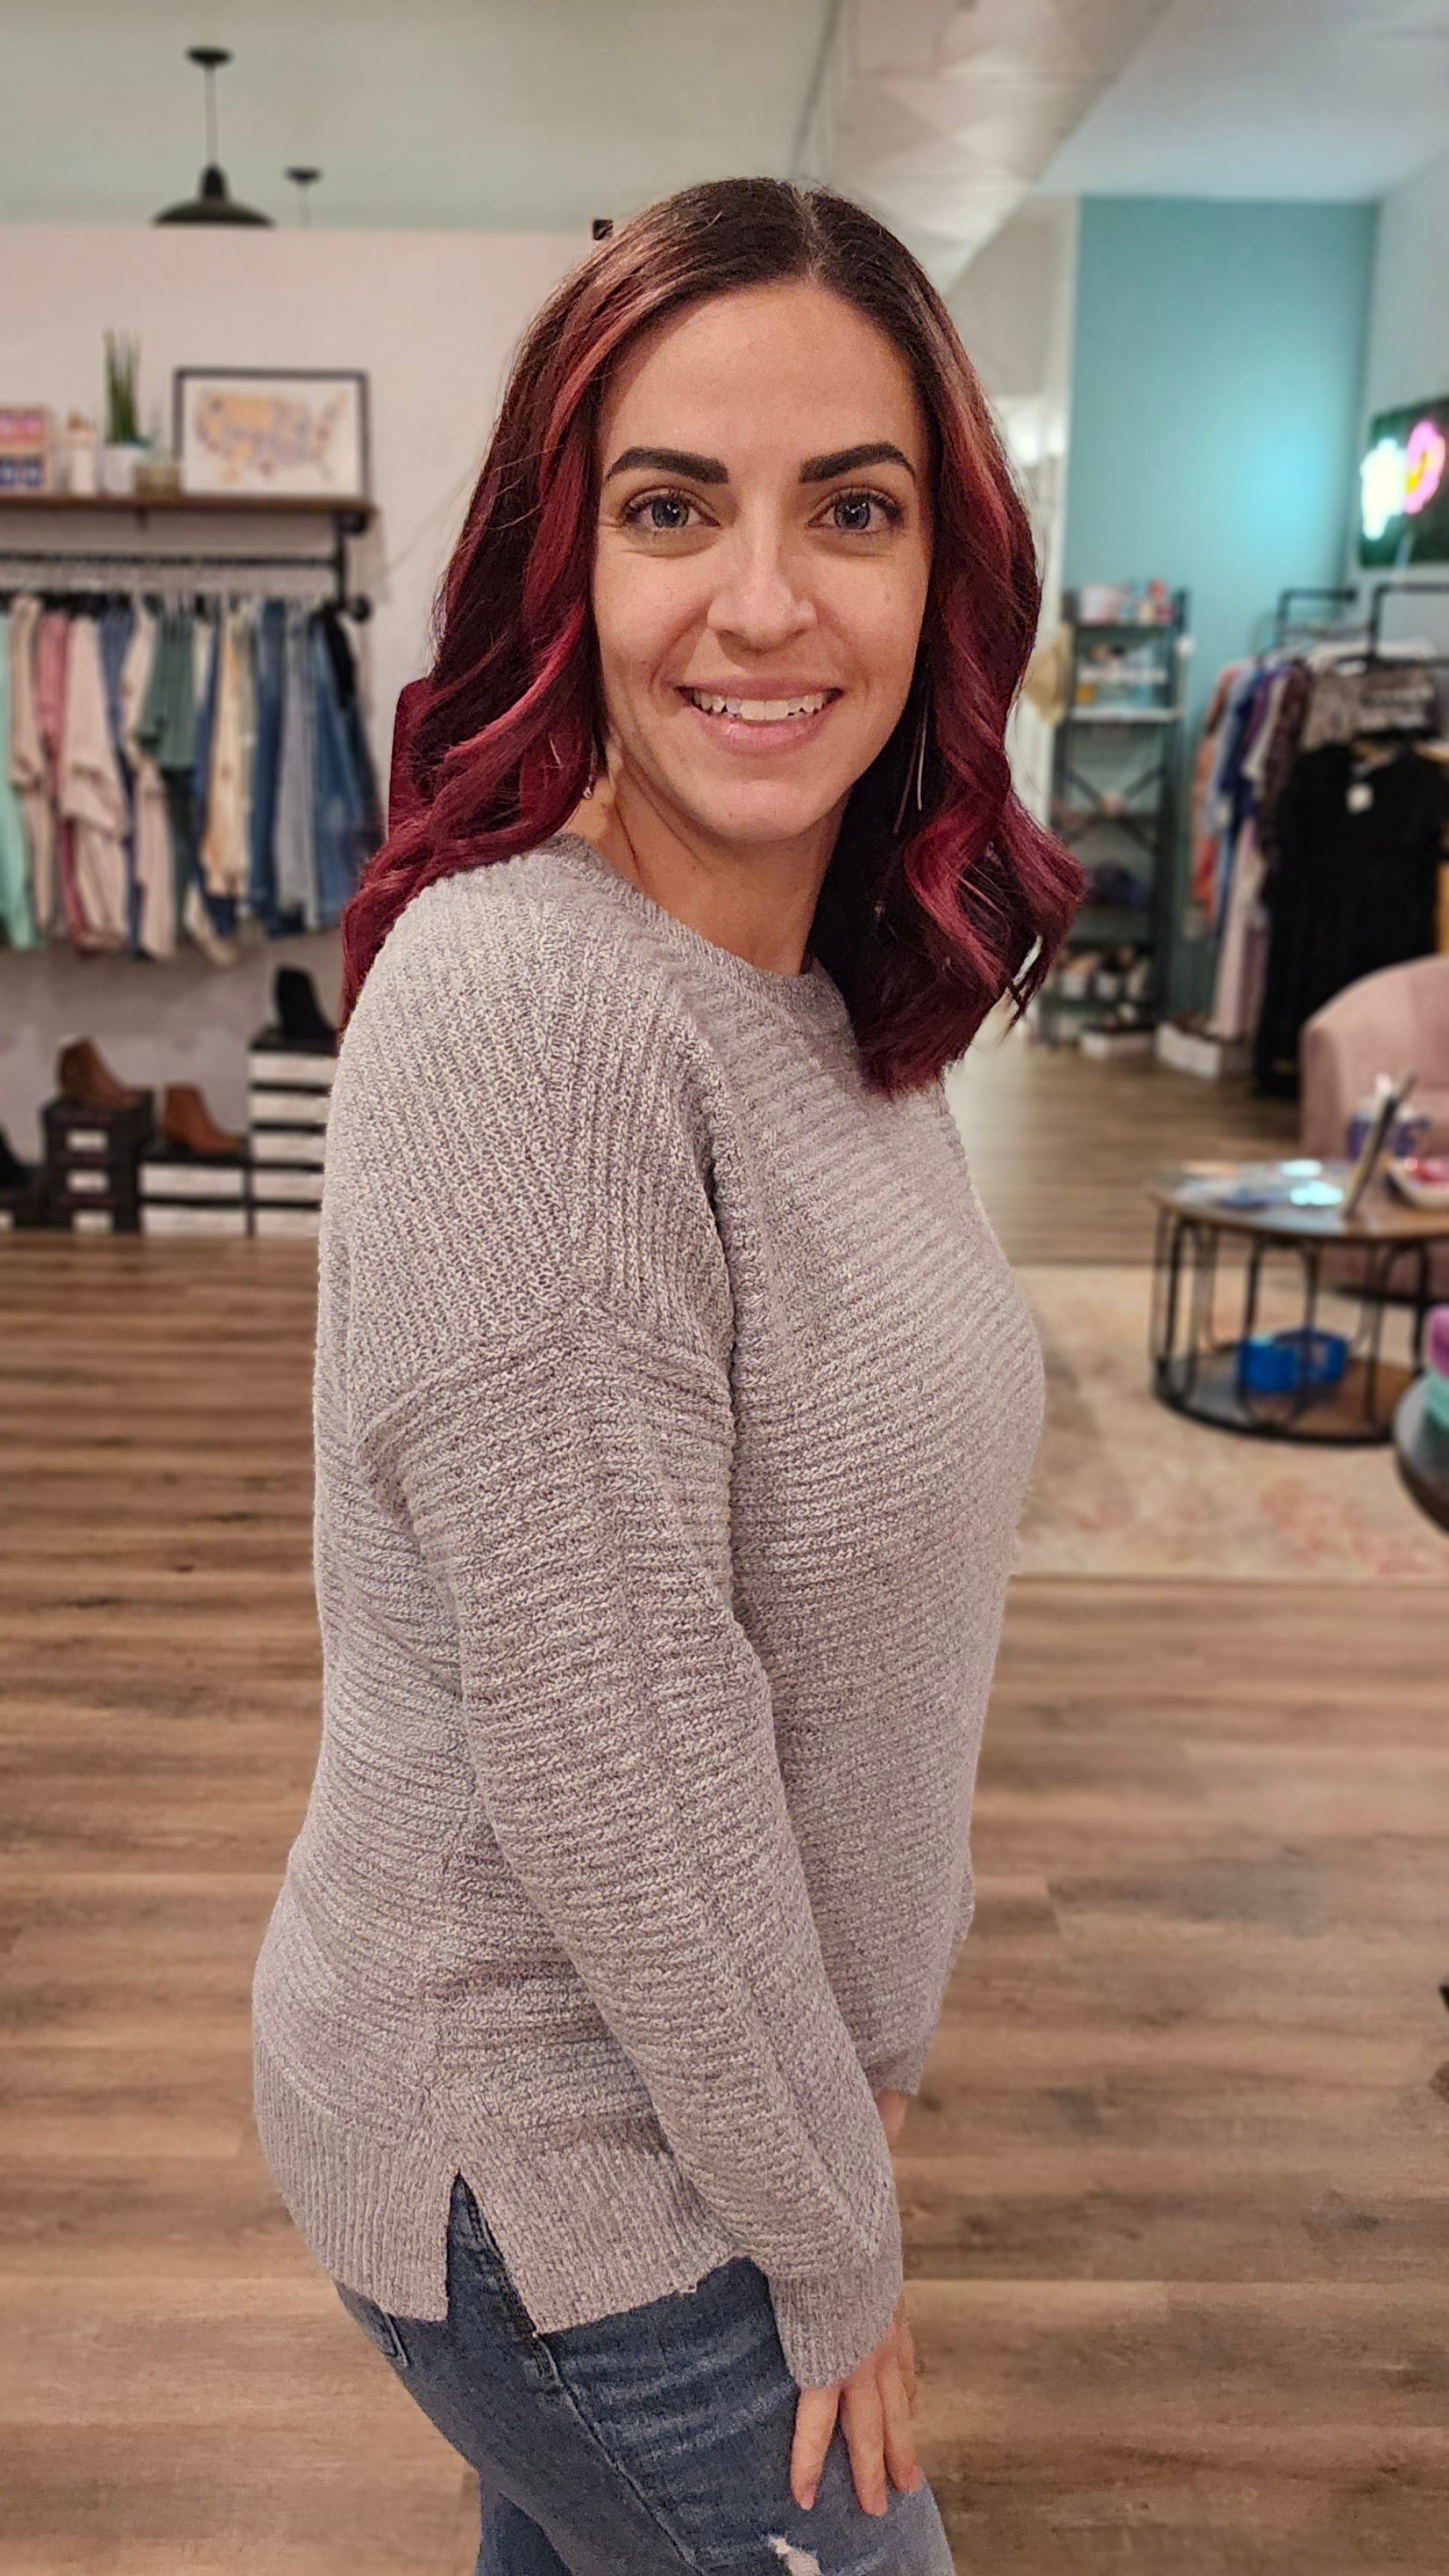 Shop Madison Horizontal Stripe Sweater - Gray-Shirts & Tops at Ruby Joy Boutique, a Women's Clothing Store in Pickerington, Ohio